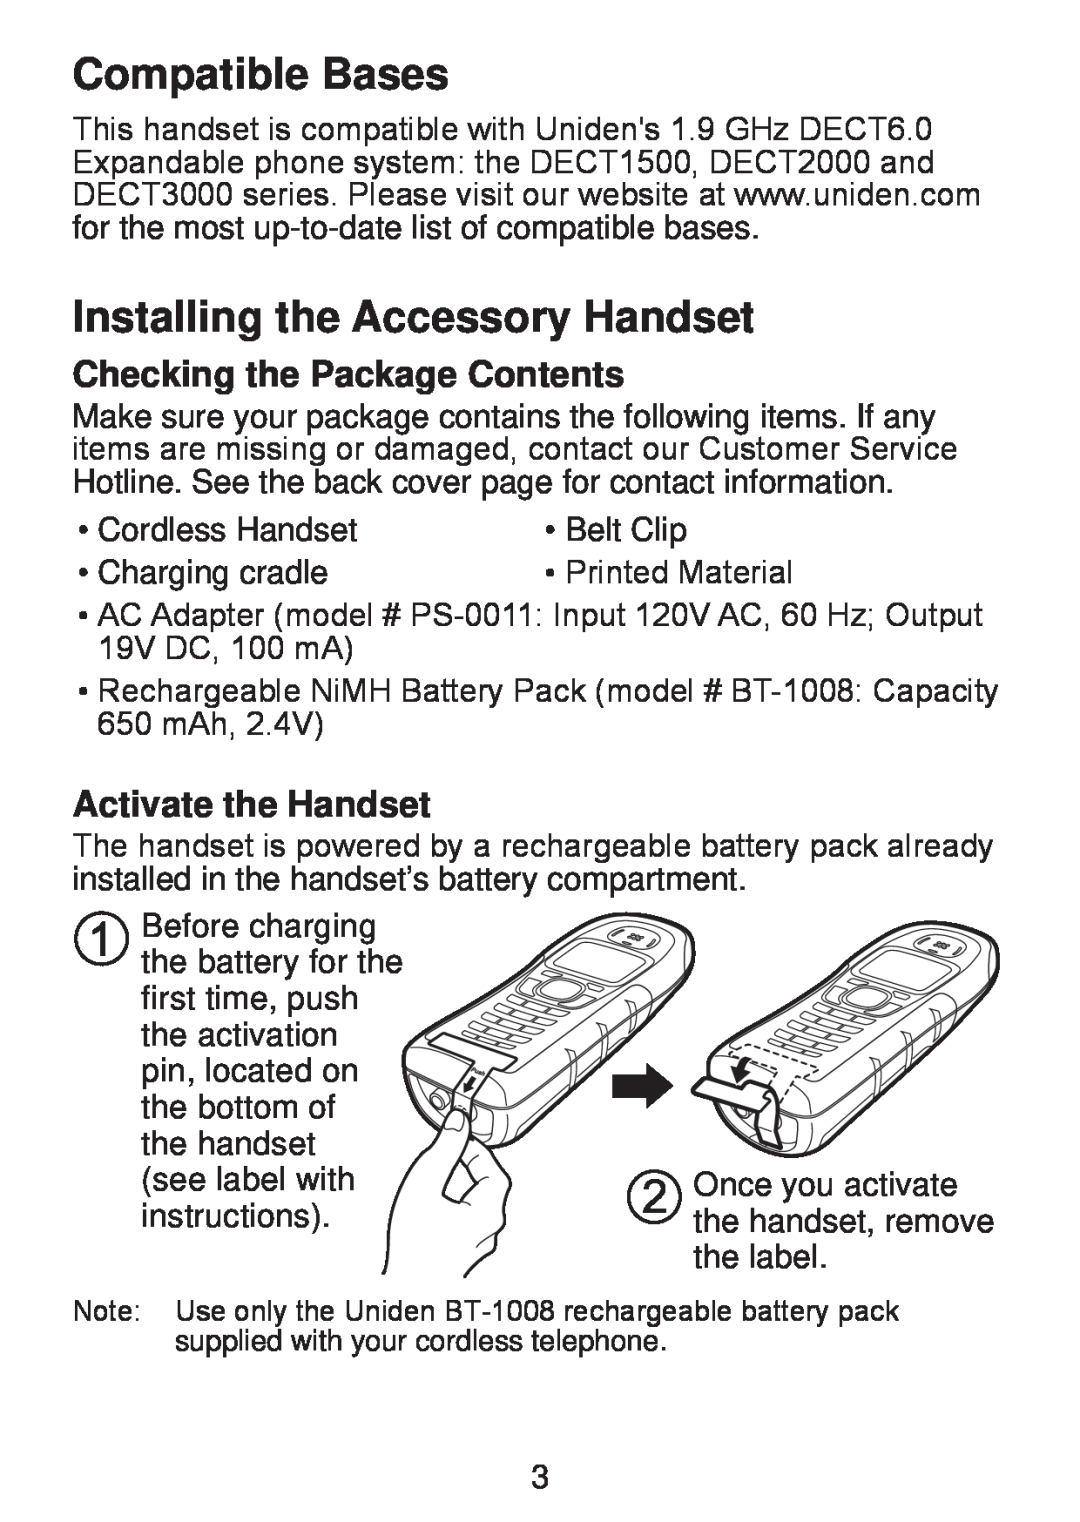 Uniden DWX207 Compatible Bases, Installing the Accessory Handset, Checking the Package Contents, Activate the Handset 